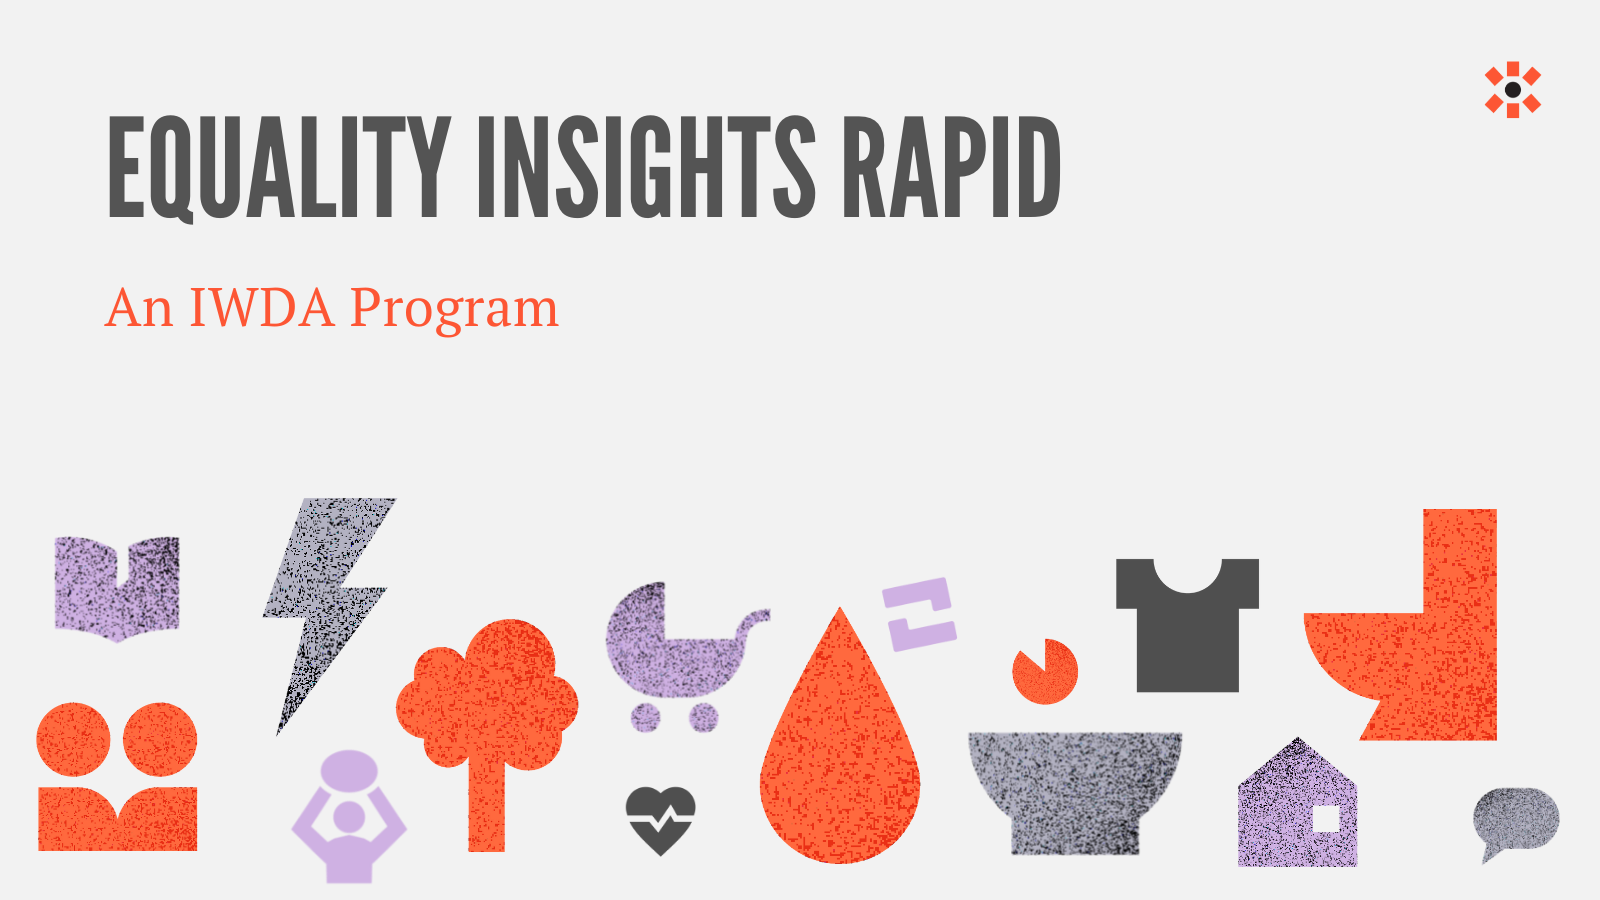 Grey background with text about Equality Insights Rapid. Orange, purple and grey icons that represent the dimensions it measures.